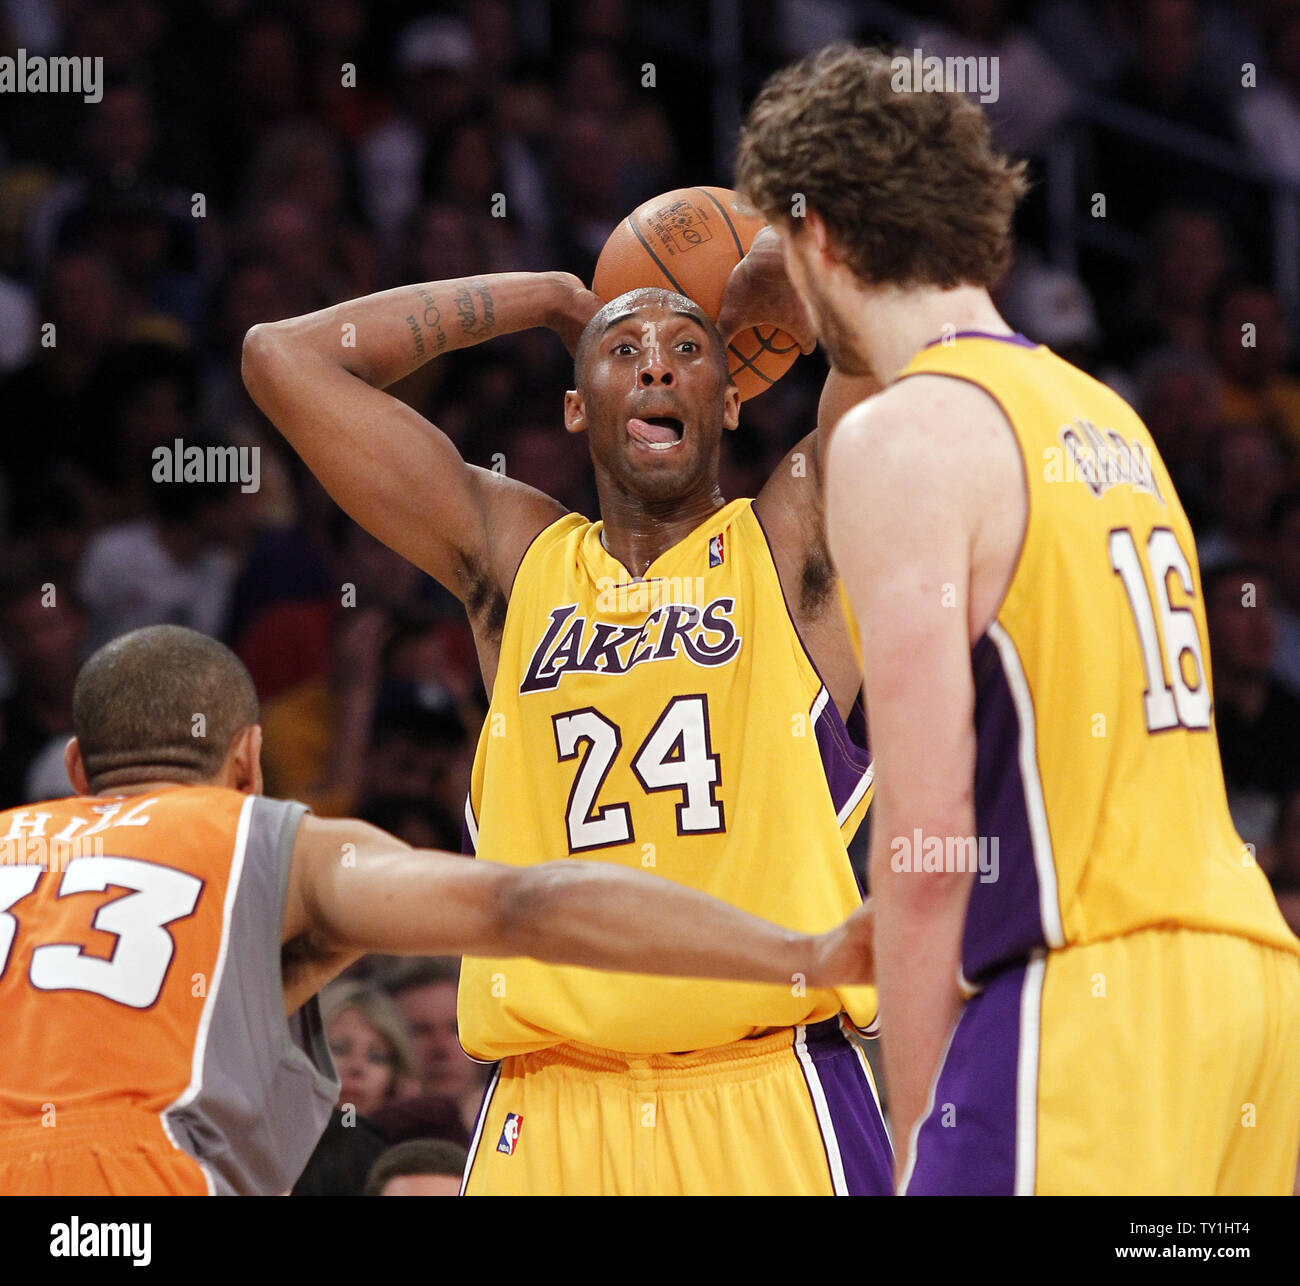 Los Angeles Lakers' Kobe Bryant, center, tries to drive past Phoenix Suns' Raja  Bell, left, and Shawn Marion in the second quarter of a Western Conference  playoff basketball game Tuesday, April 24